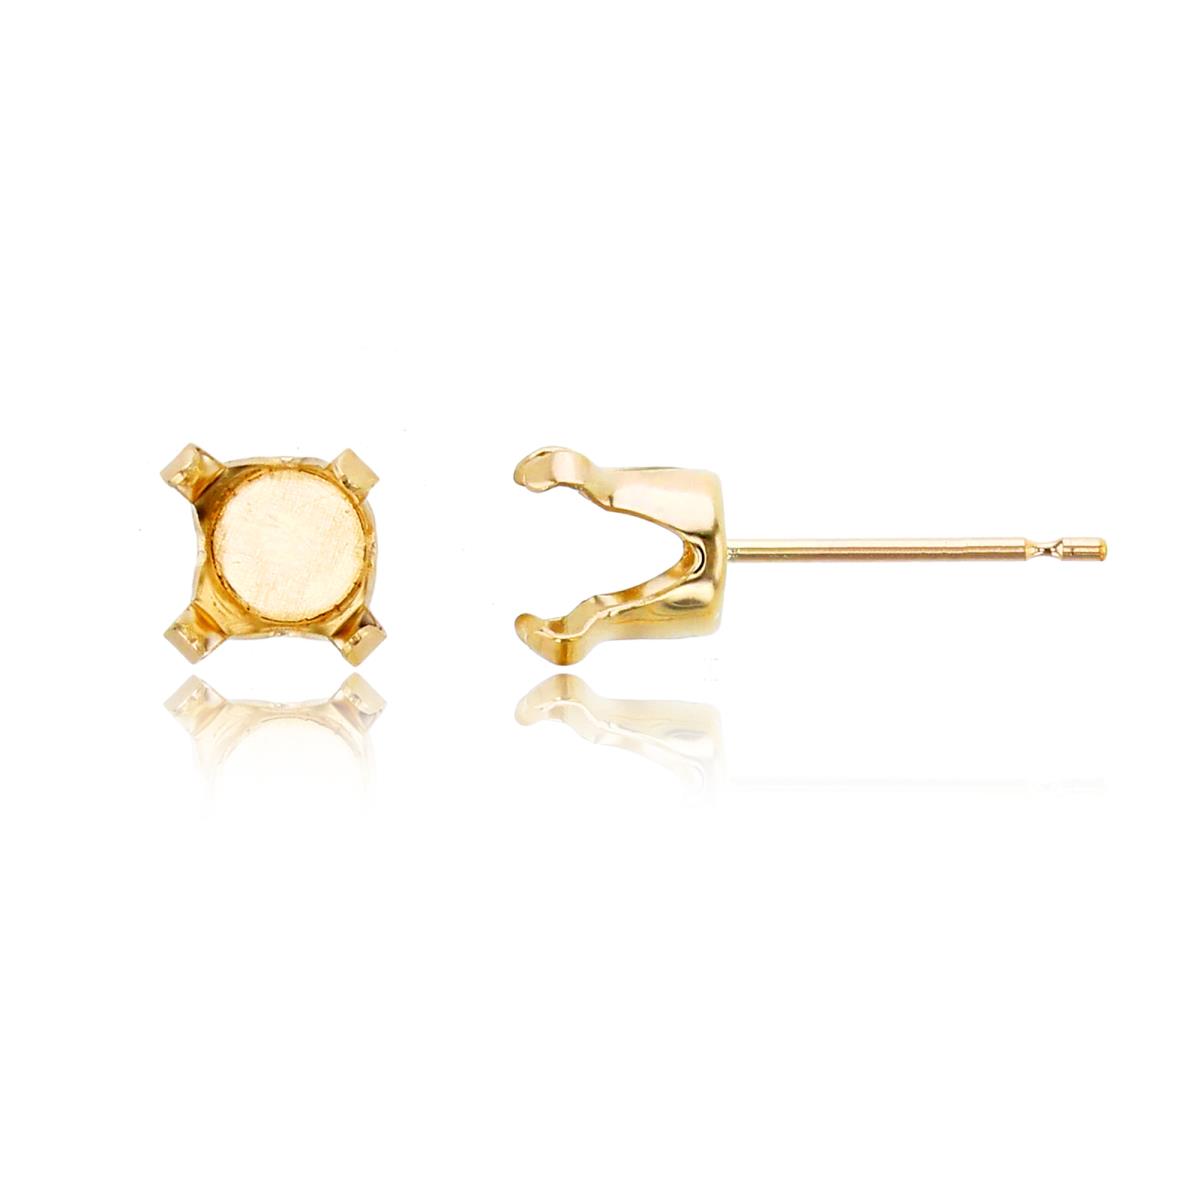 10K Yellow Gold 6mm Rd 4-Prong Stud Finding (PR)